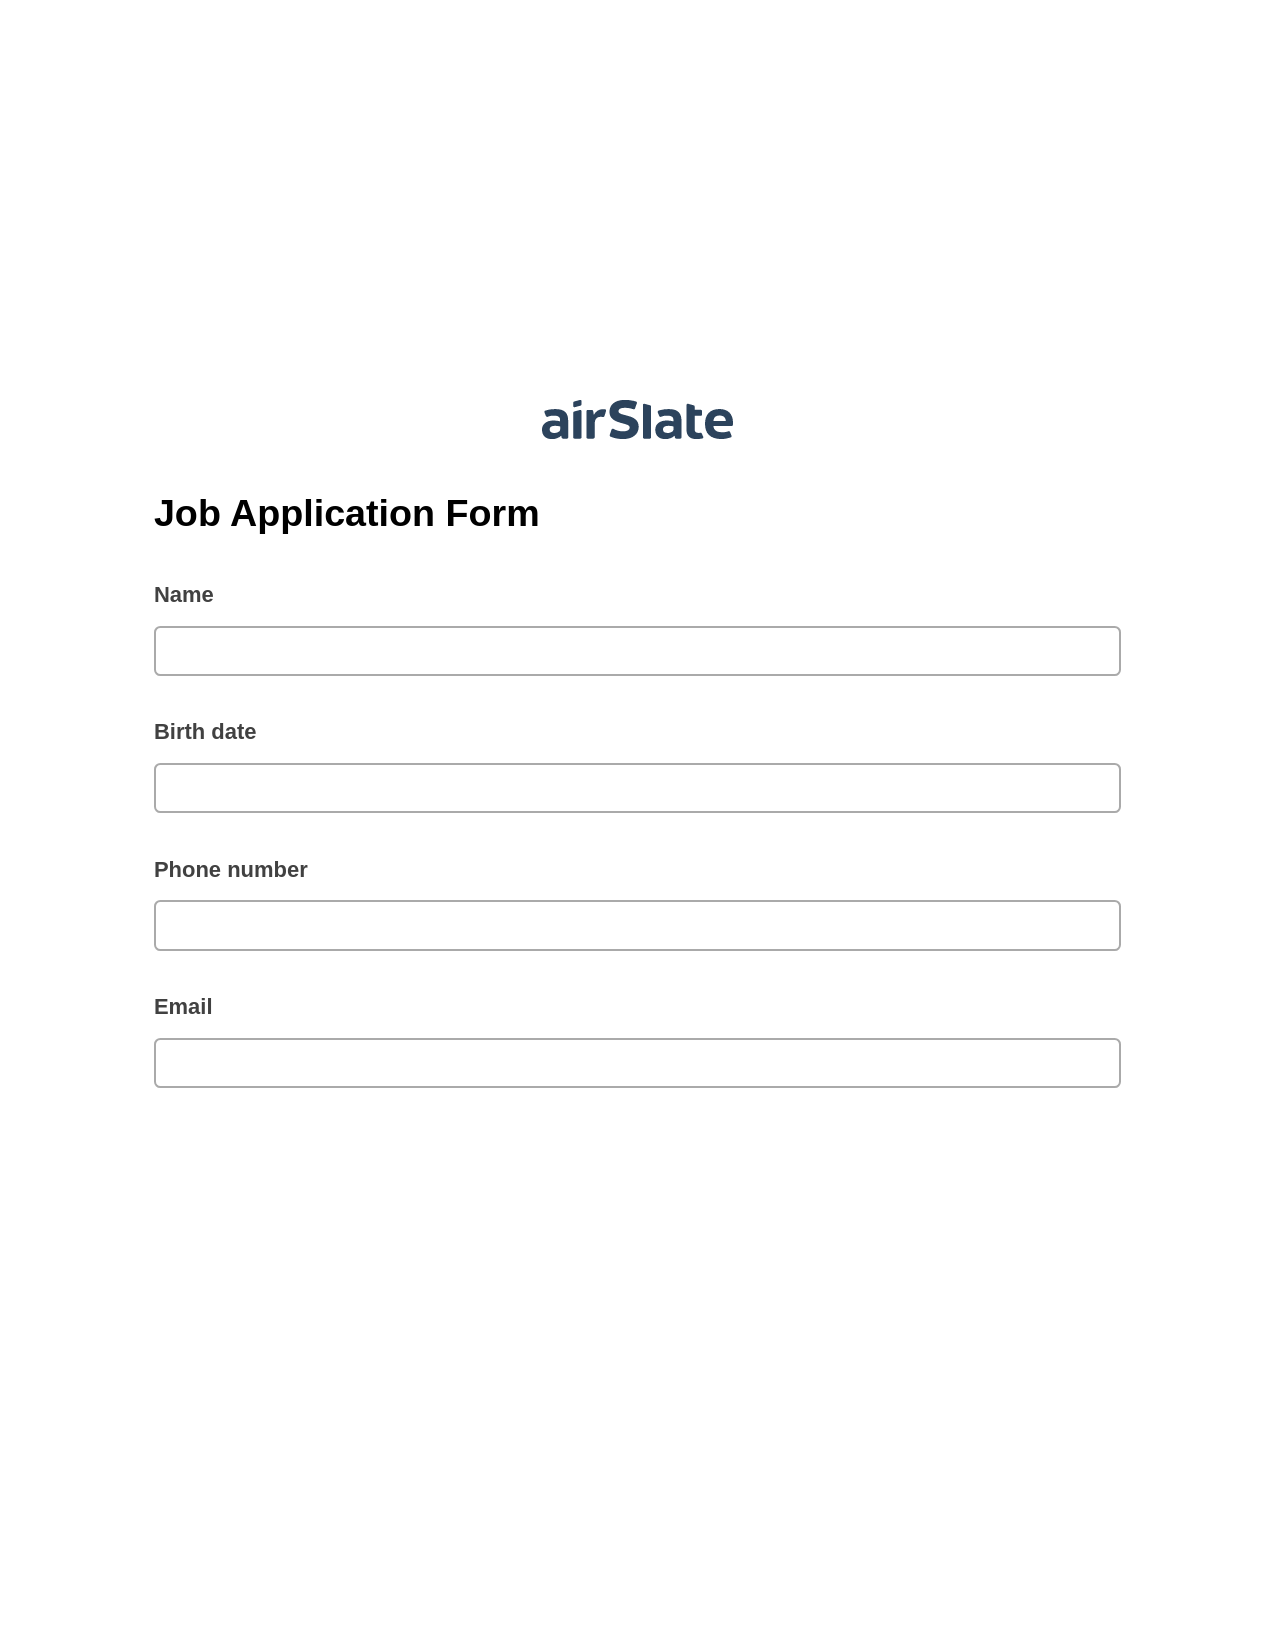 Job Application Form Pre-fill from Excel Spreadsheet Dropdown Options Bot, Create slate from another Flow Bot, Slack Notification Postfinish Bot